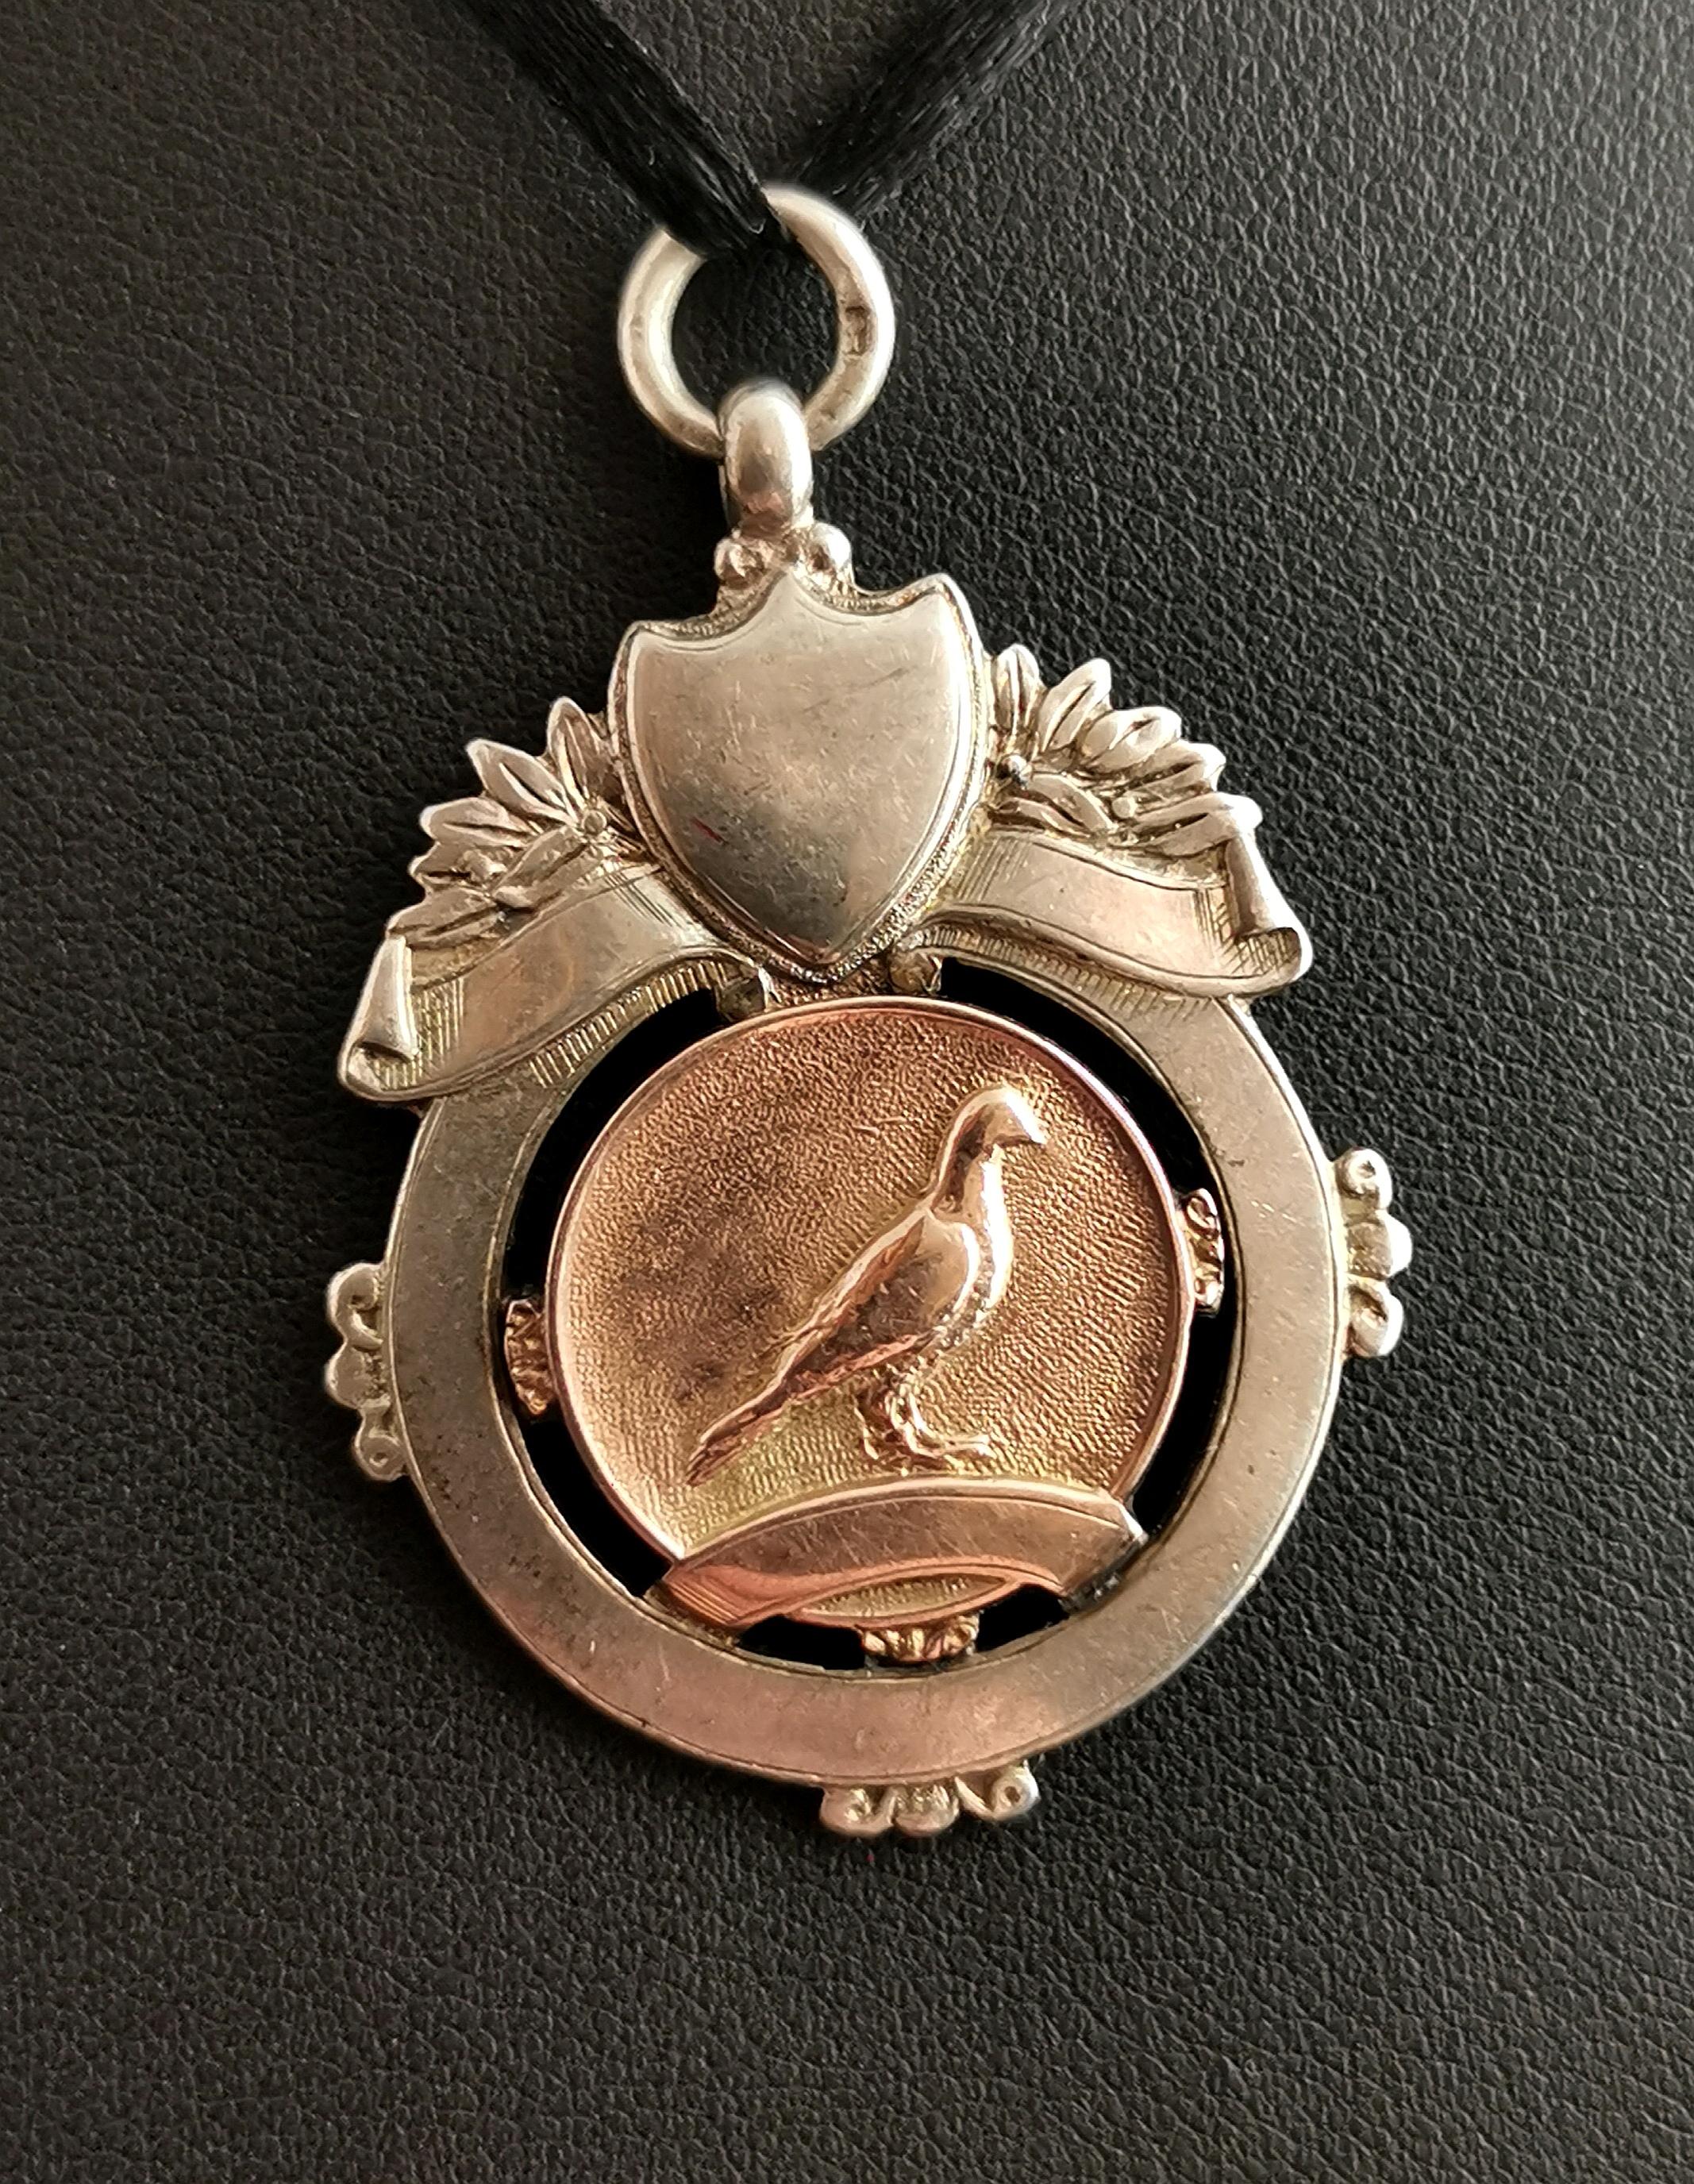 An attractive vintage, 1920's sterling silver and Rose gold watch fob pendant.

A nice piece and quite heavy for a fob with a decorative design and a 9kt Rose gold applied plaque to the centre featuring a homing pigeon.

It has a raised shield